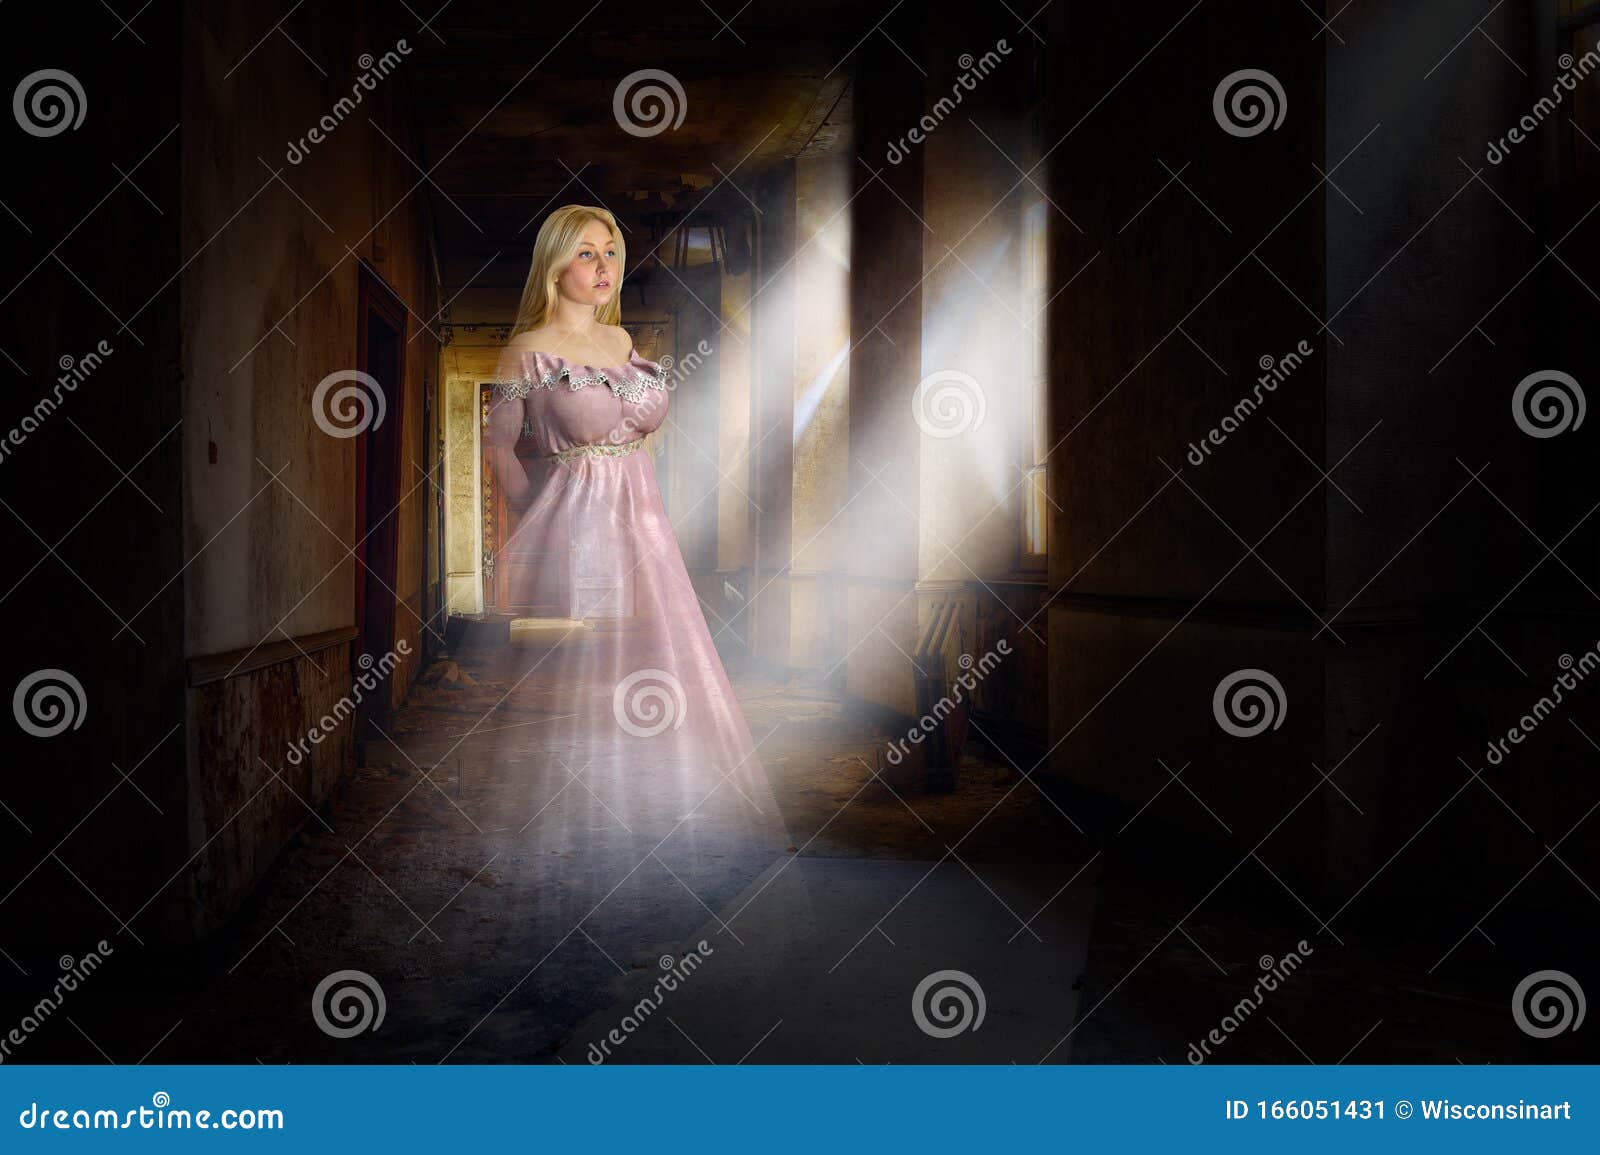 surreal halloween ghost, haunted house, woman